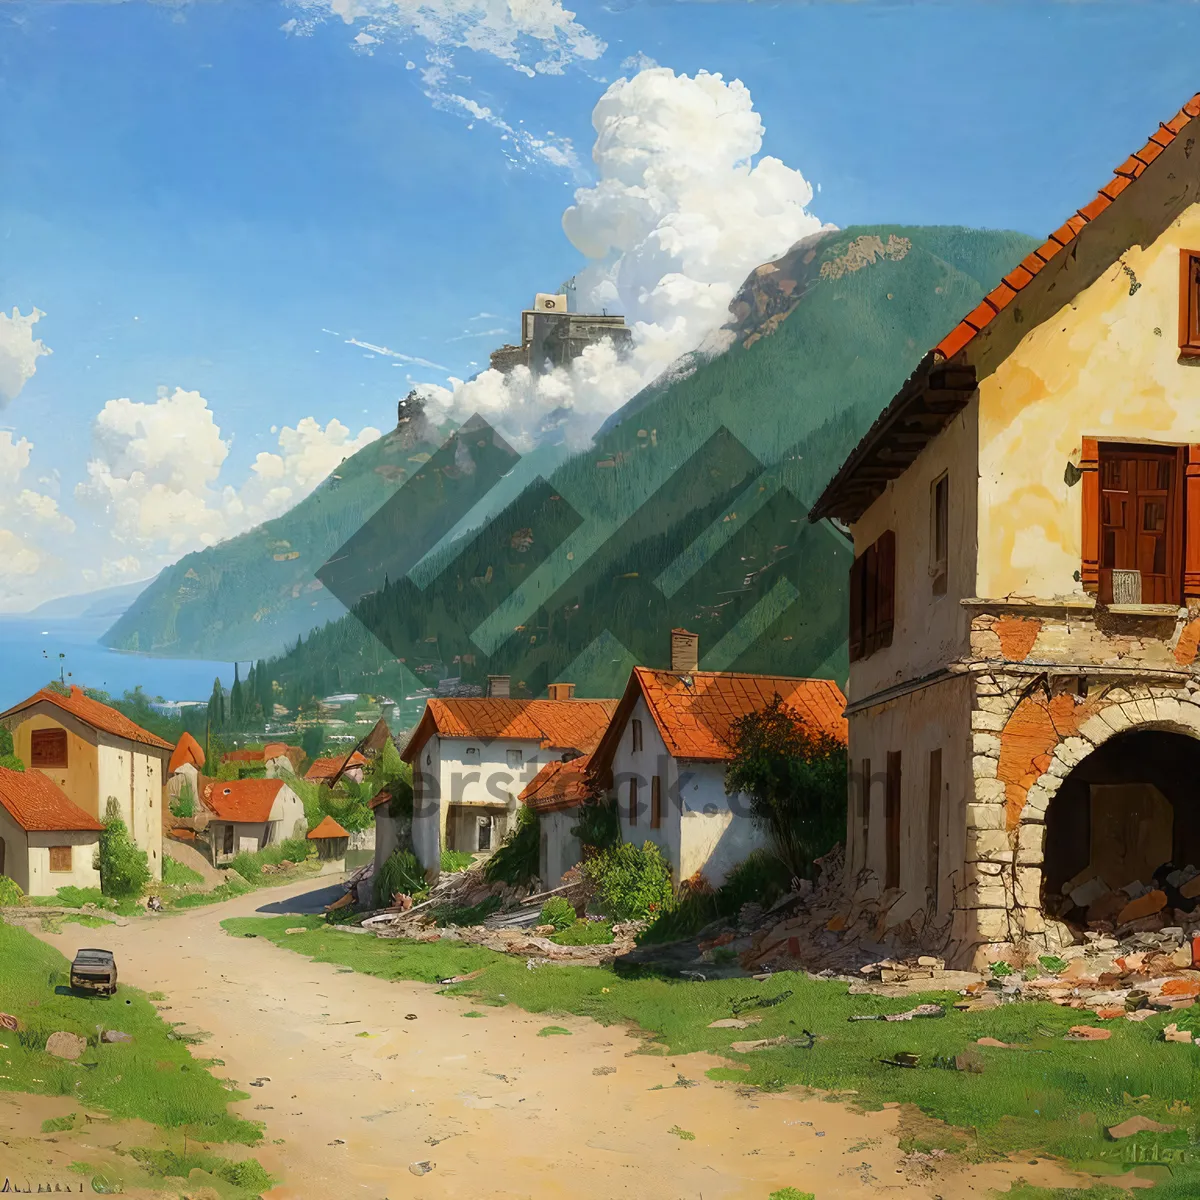 Picture of Rustic Village Retreat: Serene Mountain Landscape with Old Monastery